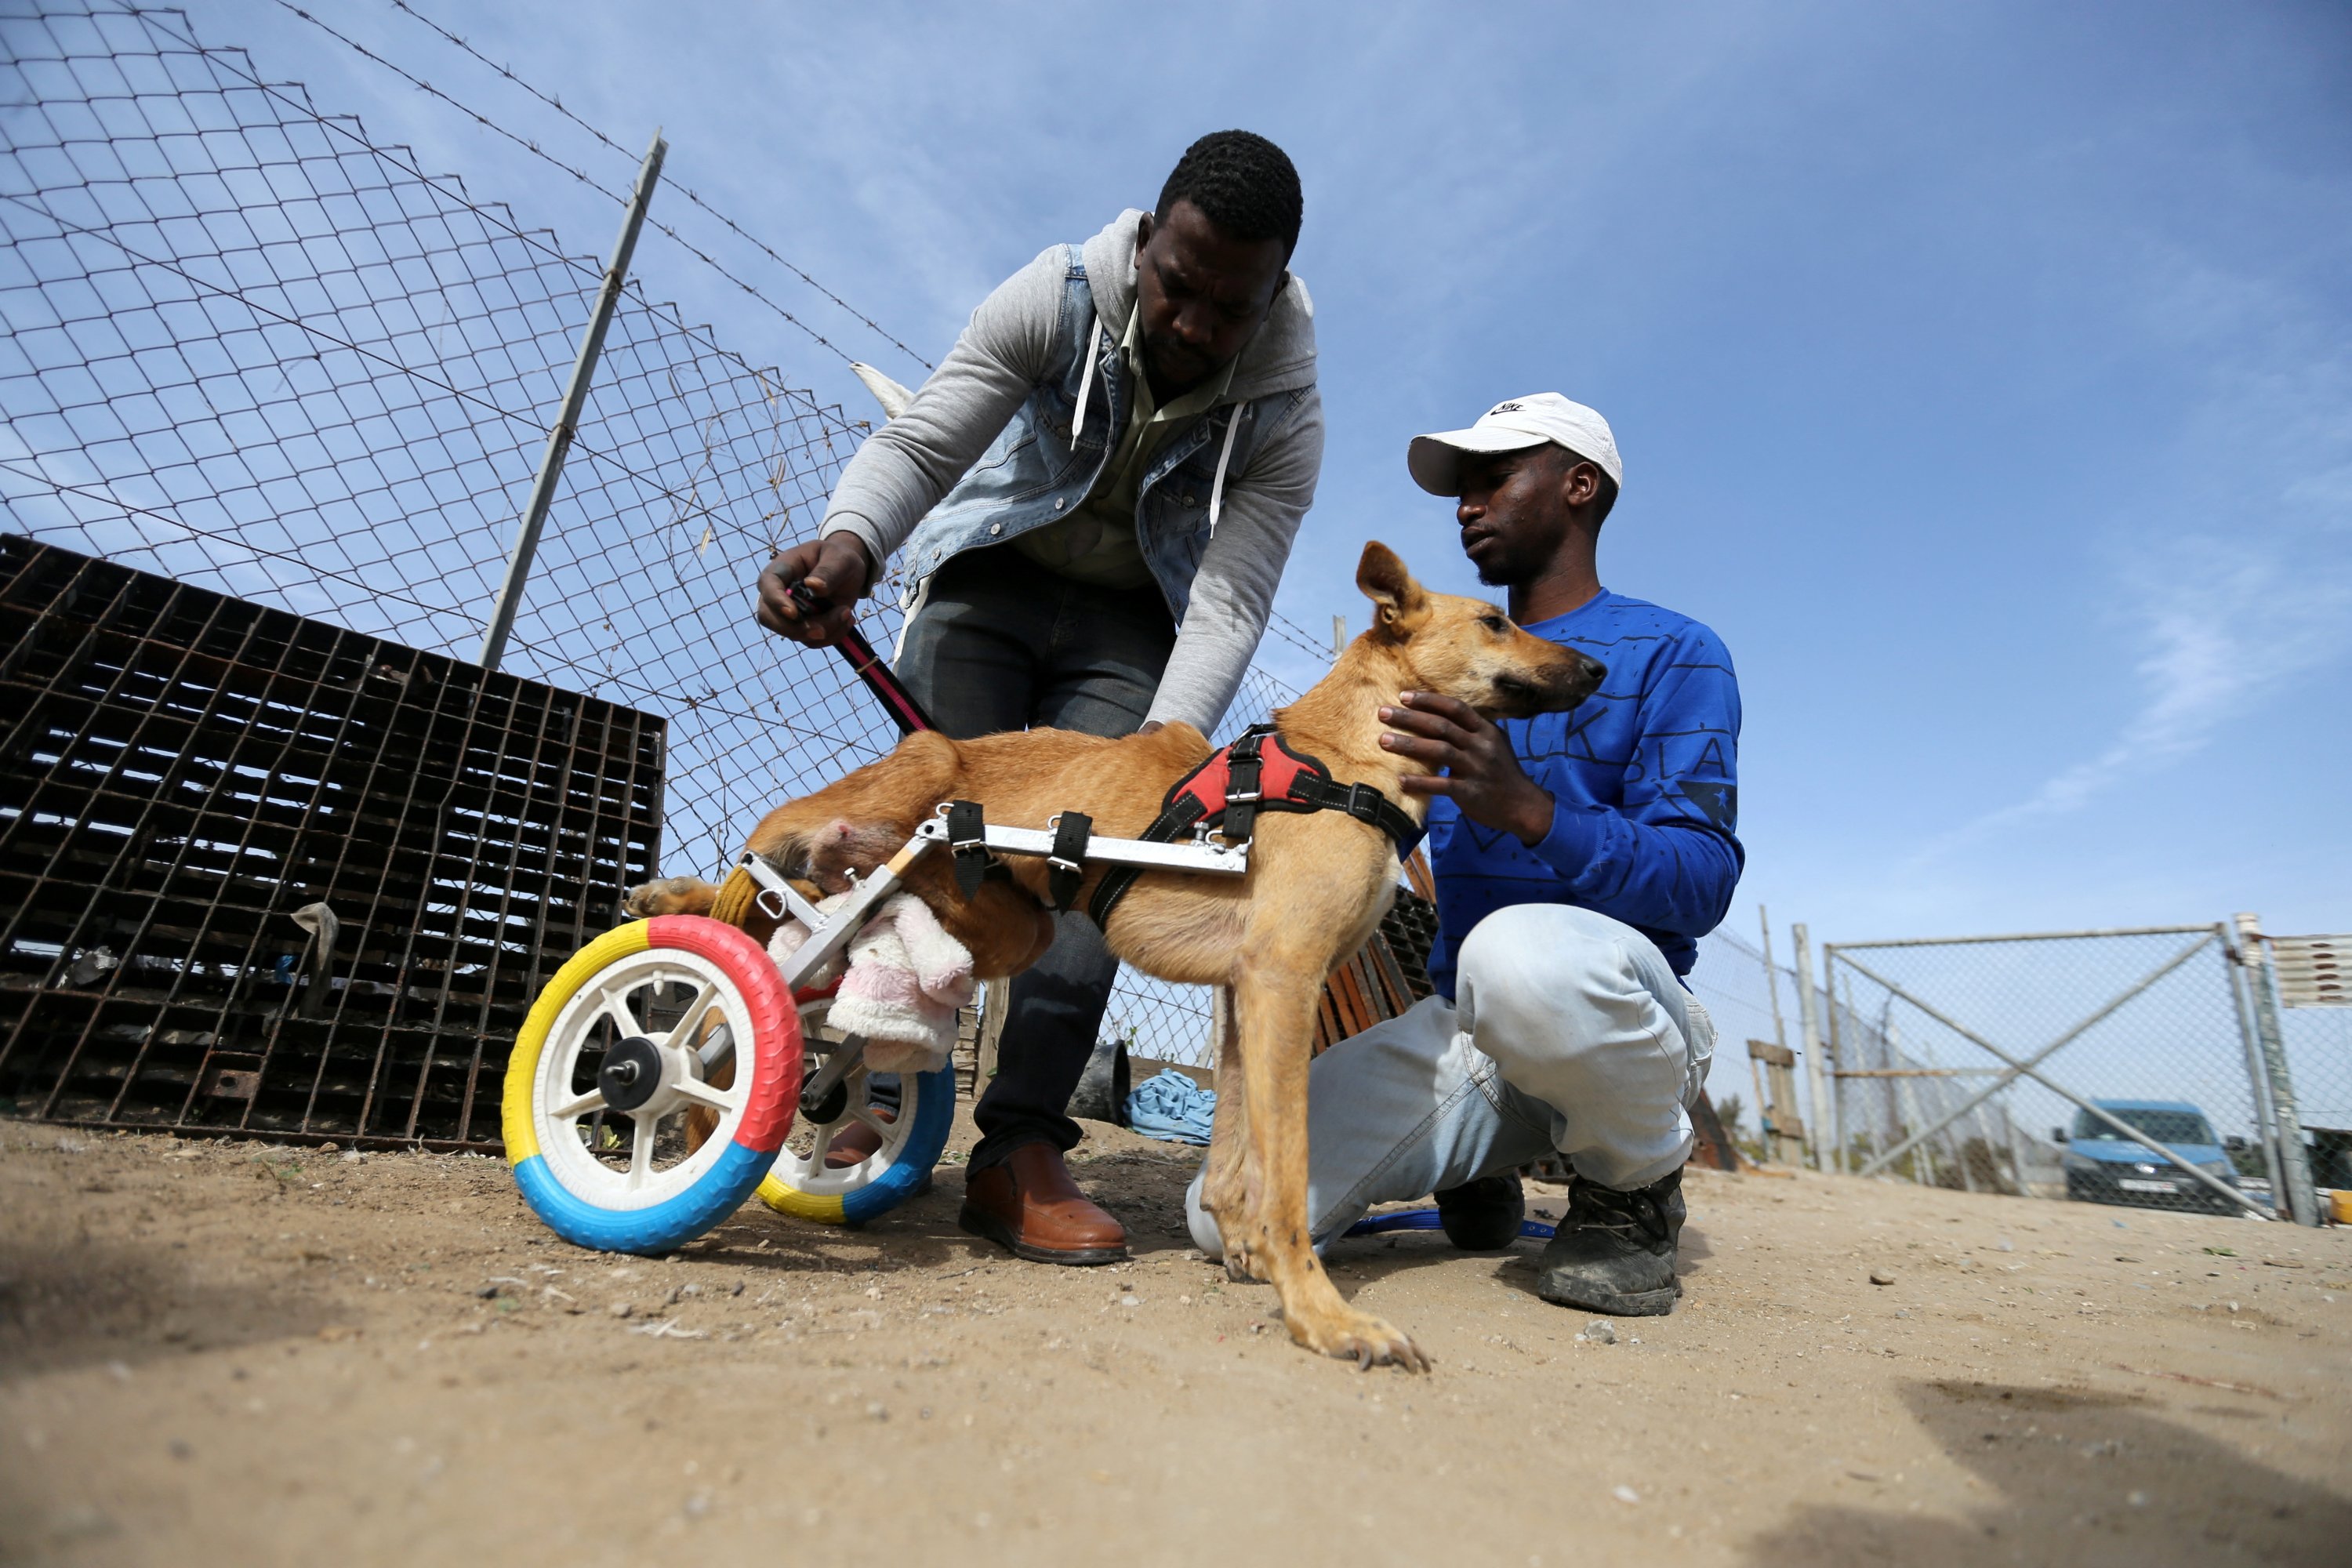 Palestinian engineer Ismail al-Aer and animal caretaker Said al-Aer put a paralyzed dog in a new wheelchair in Gaza City, Palestine, Dec. 6, 2021. (Reuters Photo)